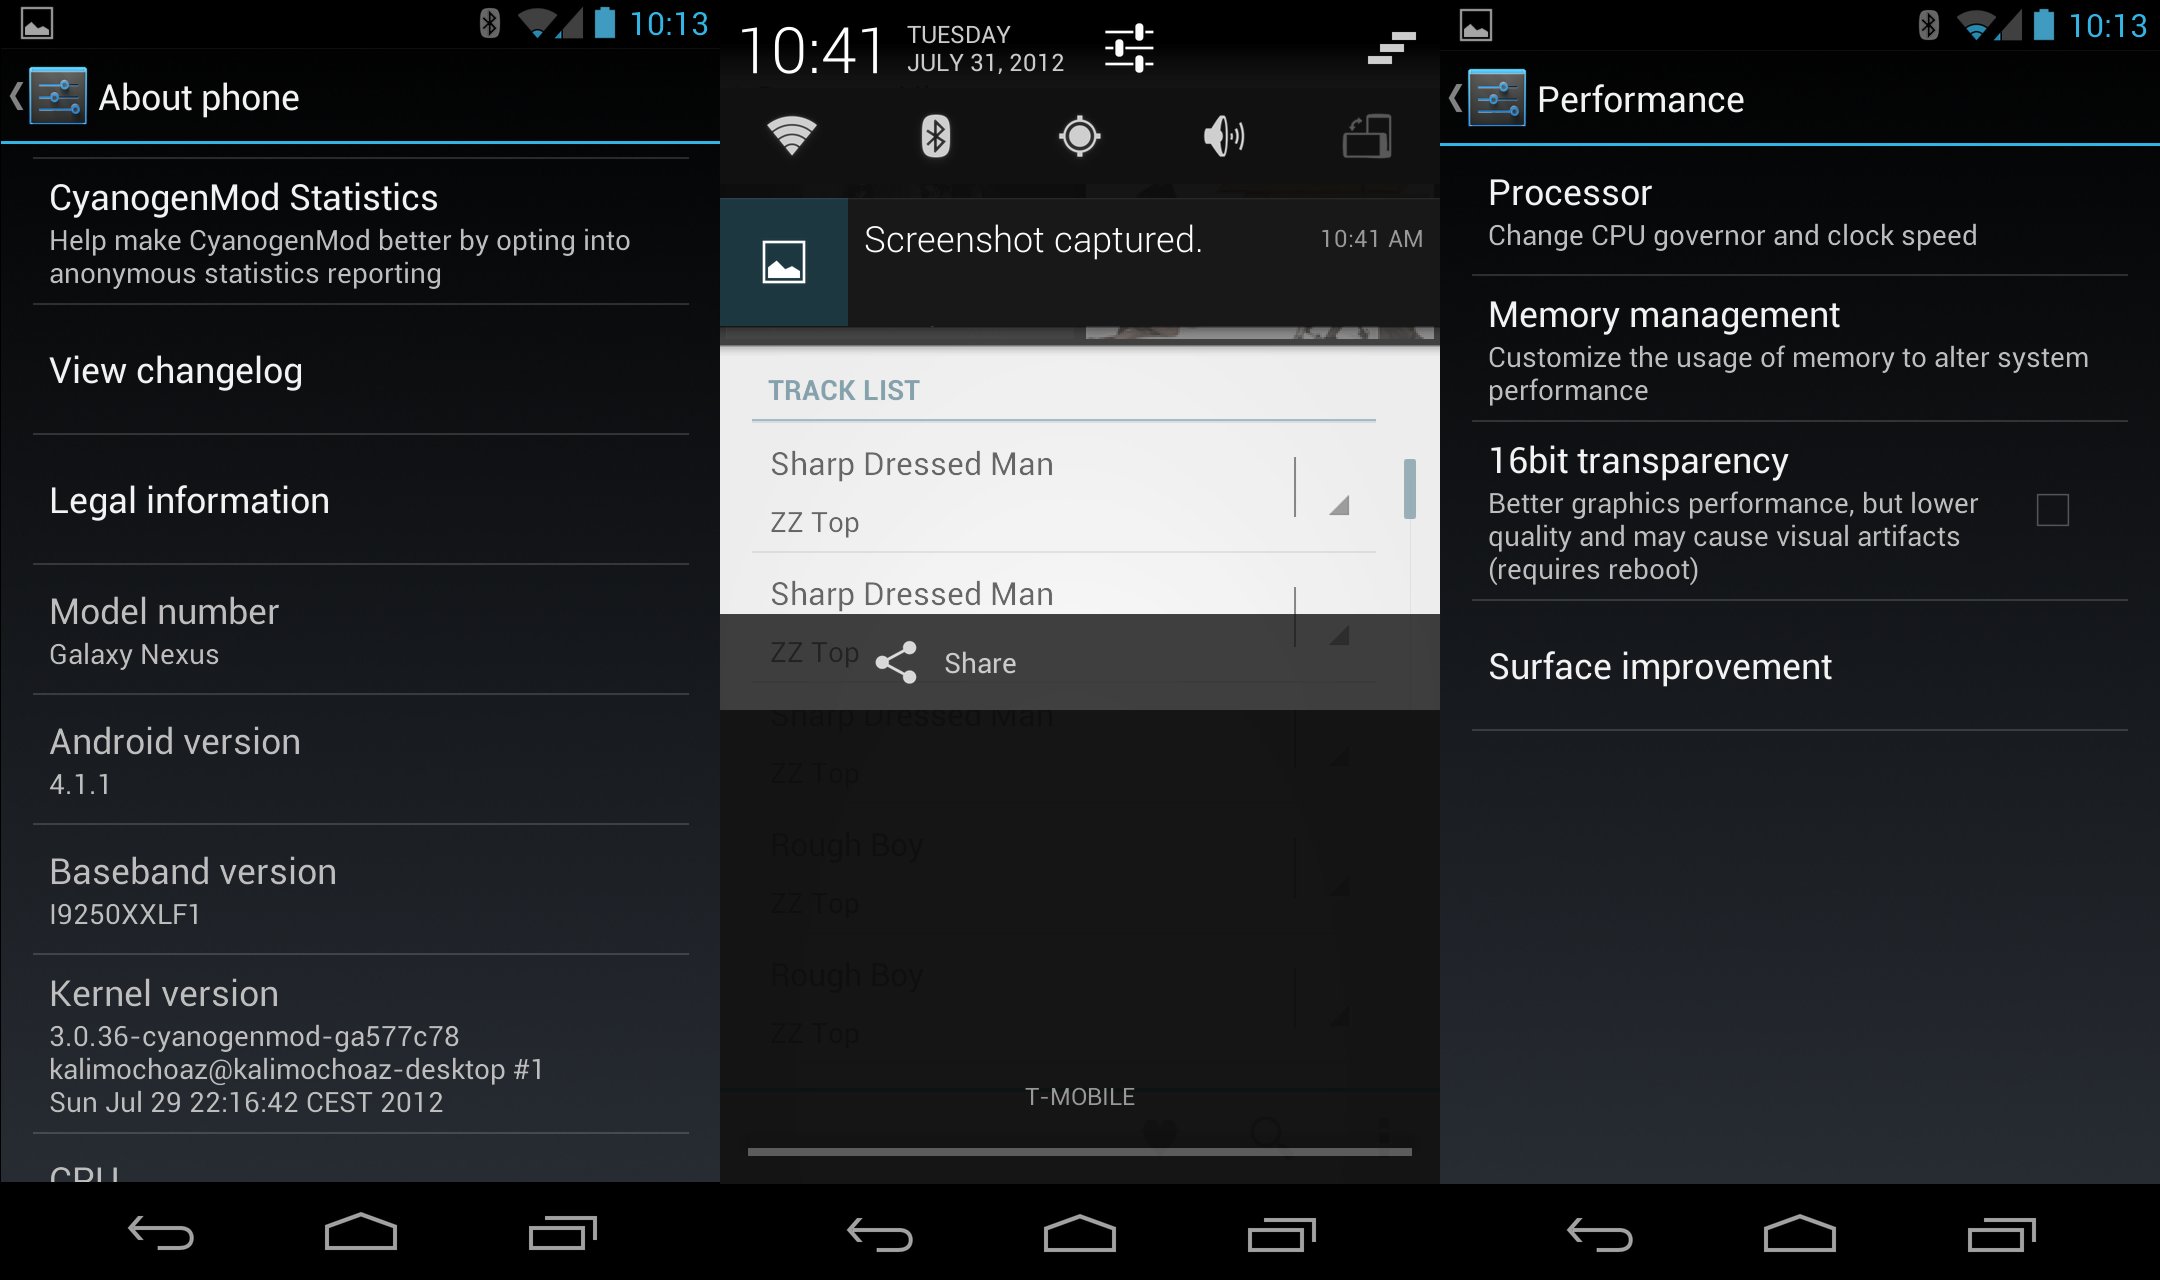 cm 10 v 1.8 - for some reason we don't have an alt tag here